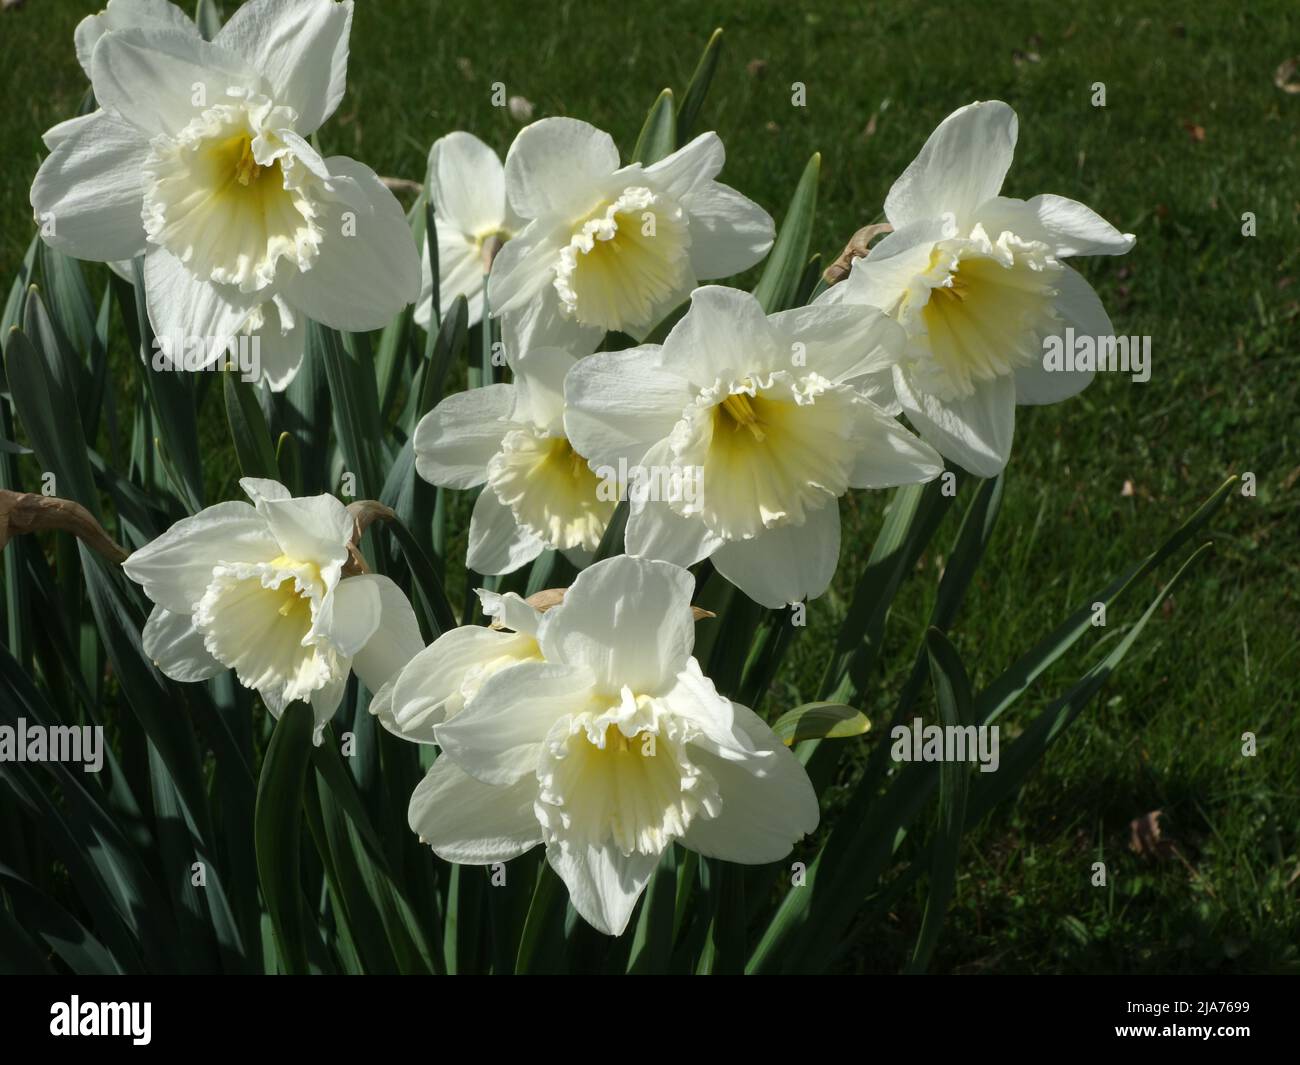 A beautiful group of completely white narcissus. Stock Photo